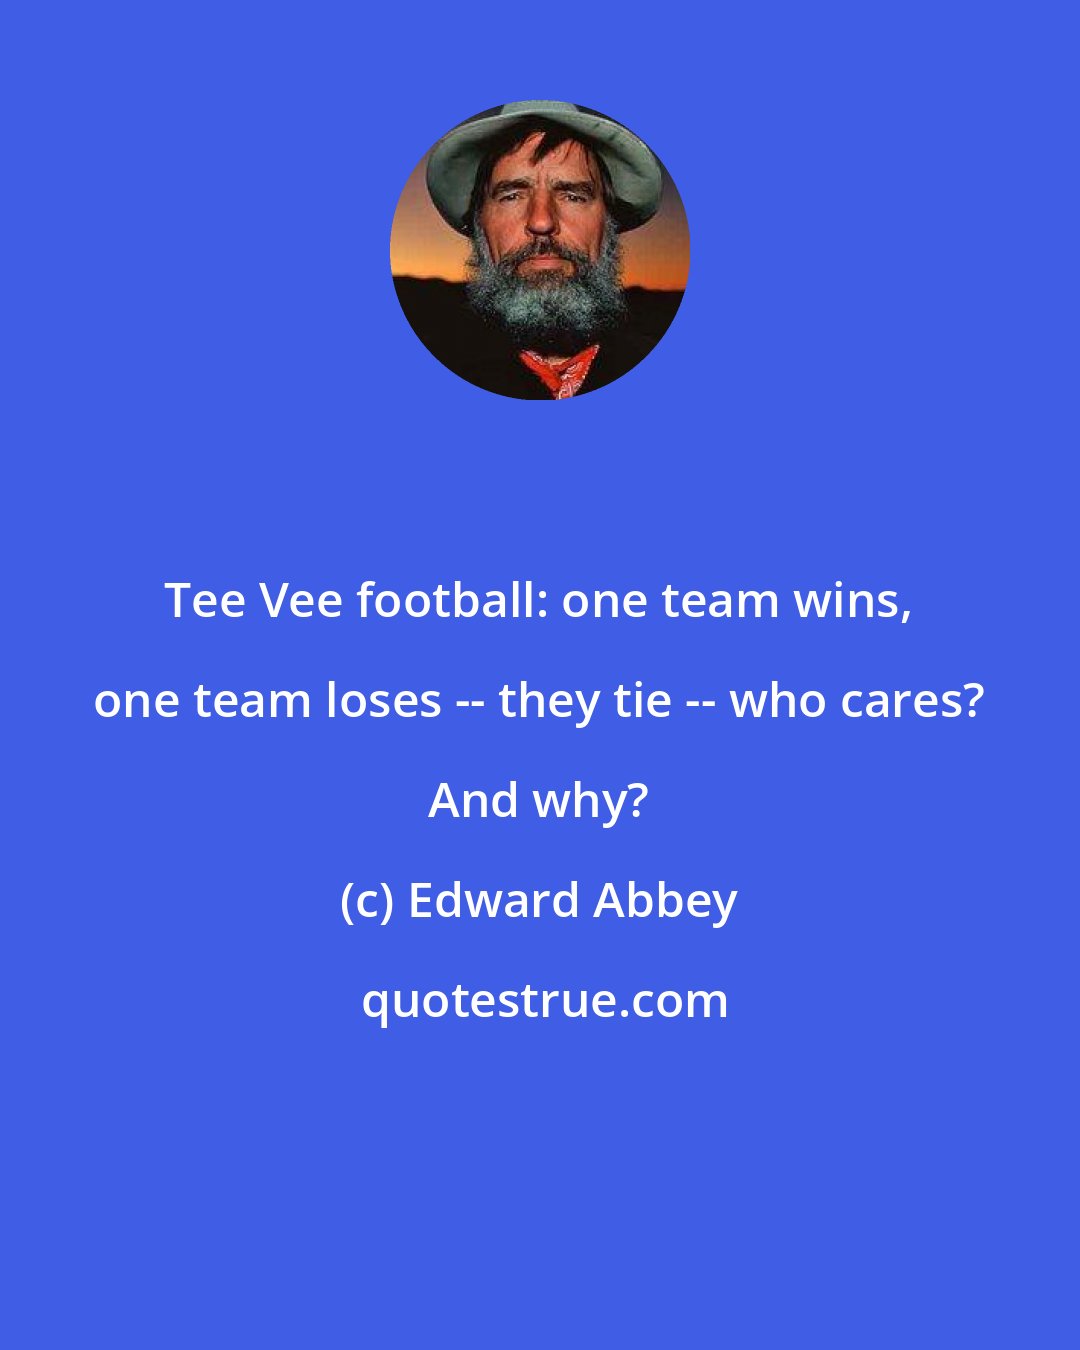 Edward Abbey: Tee Vee football: one team wins, one team loses -- they tie -- who cares? And why?